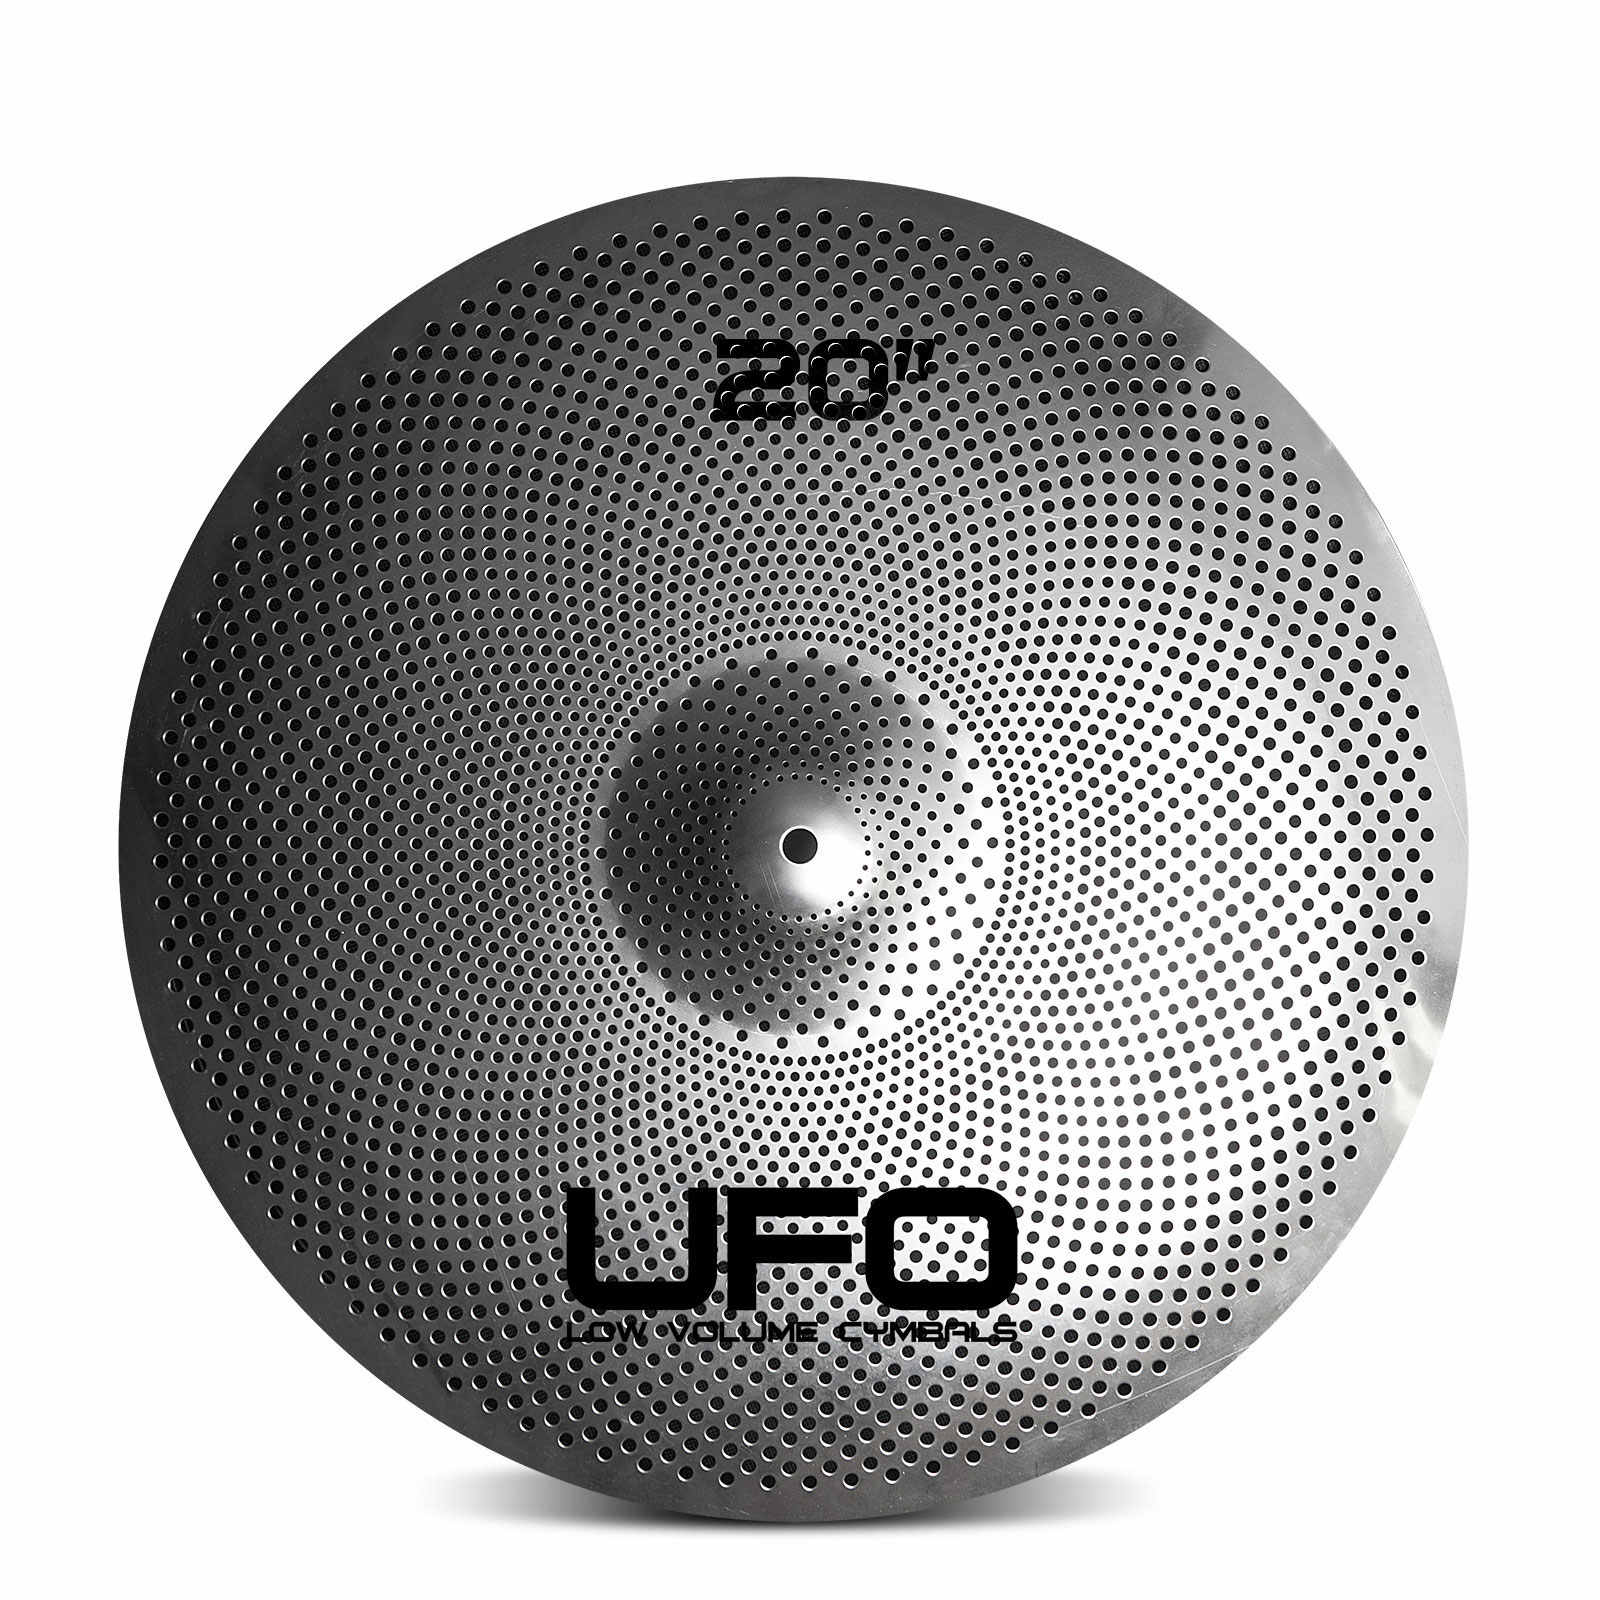 UFO CYMBALS LOW VOLUME 20 RIDE - SILENT CYMBAL